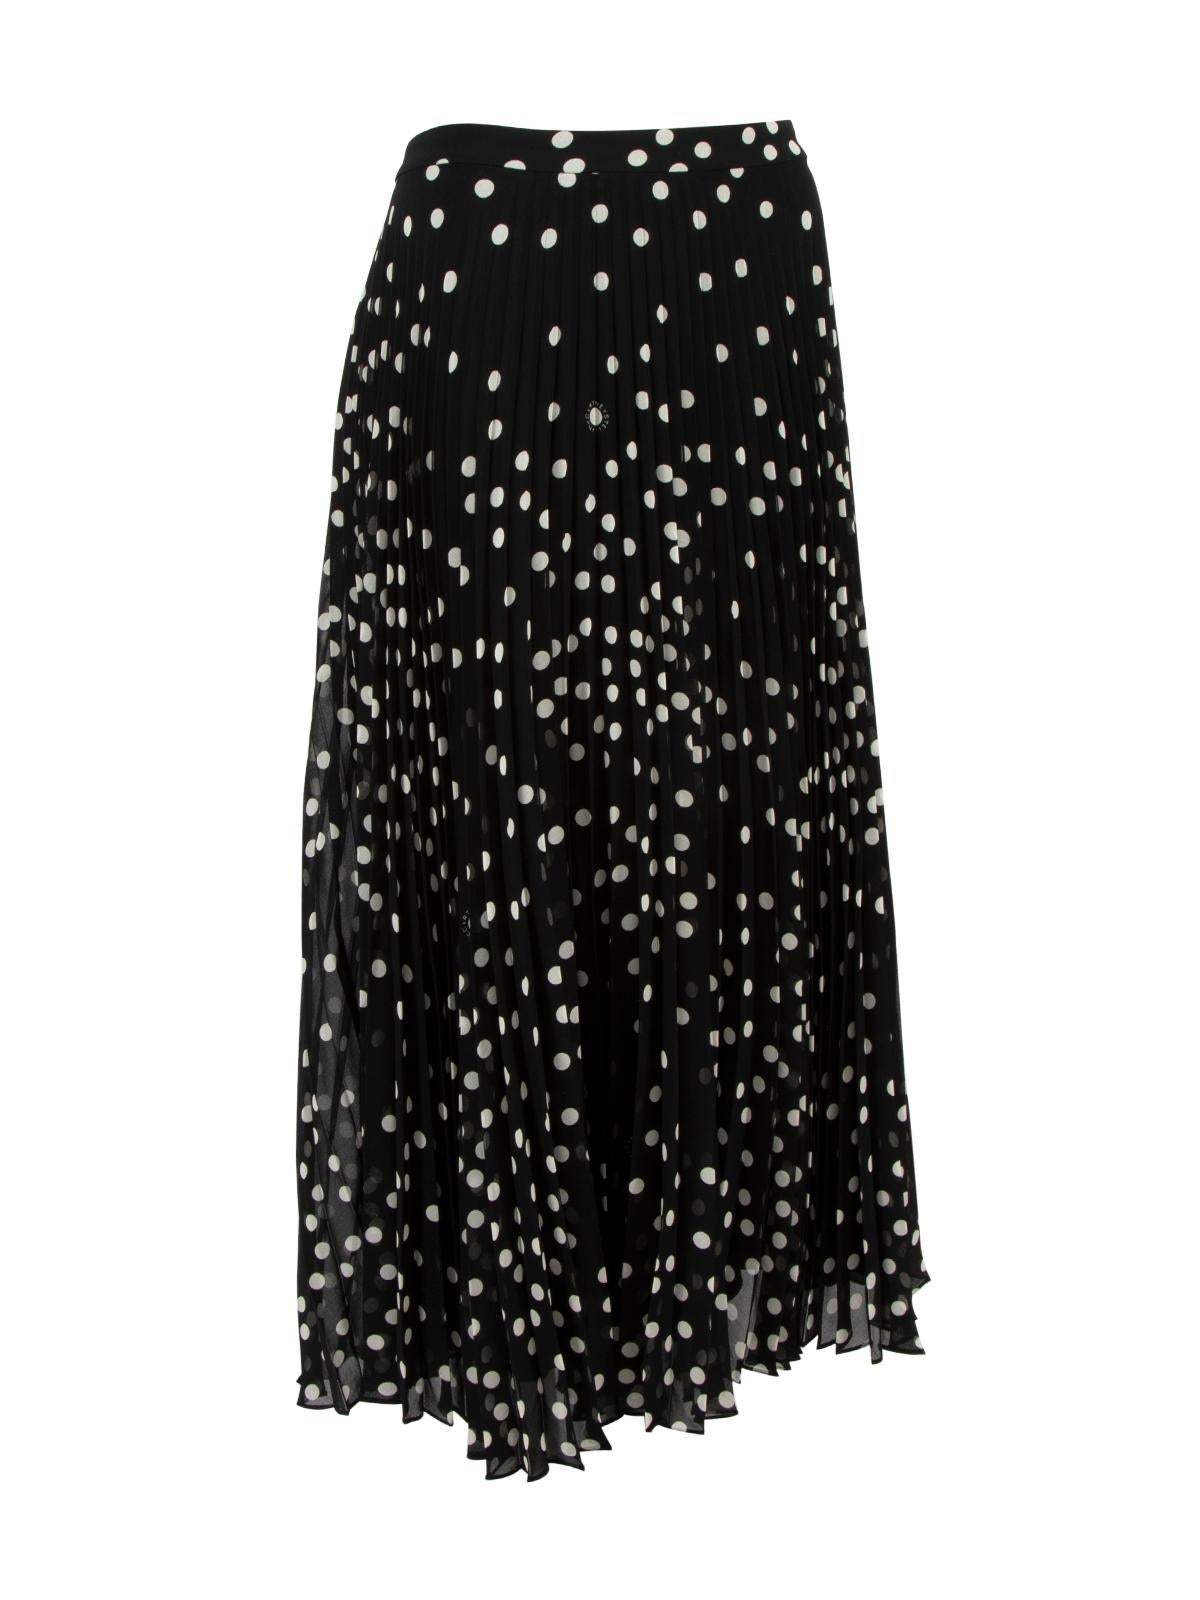 Pre-Loved Stella McCartney Women's Polka Dot Maxi Pleated Skirt In Excellent Condition In London, GB